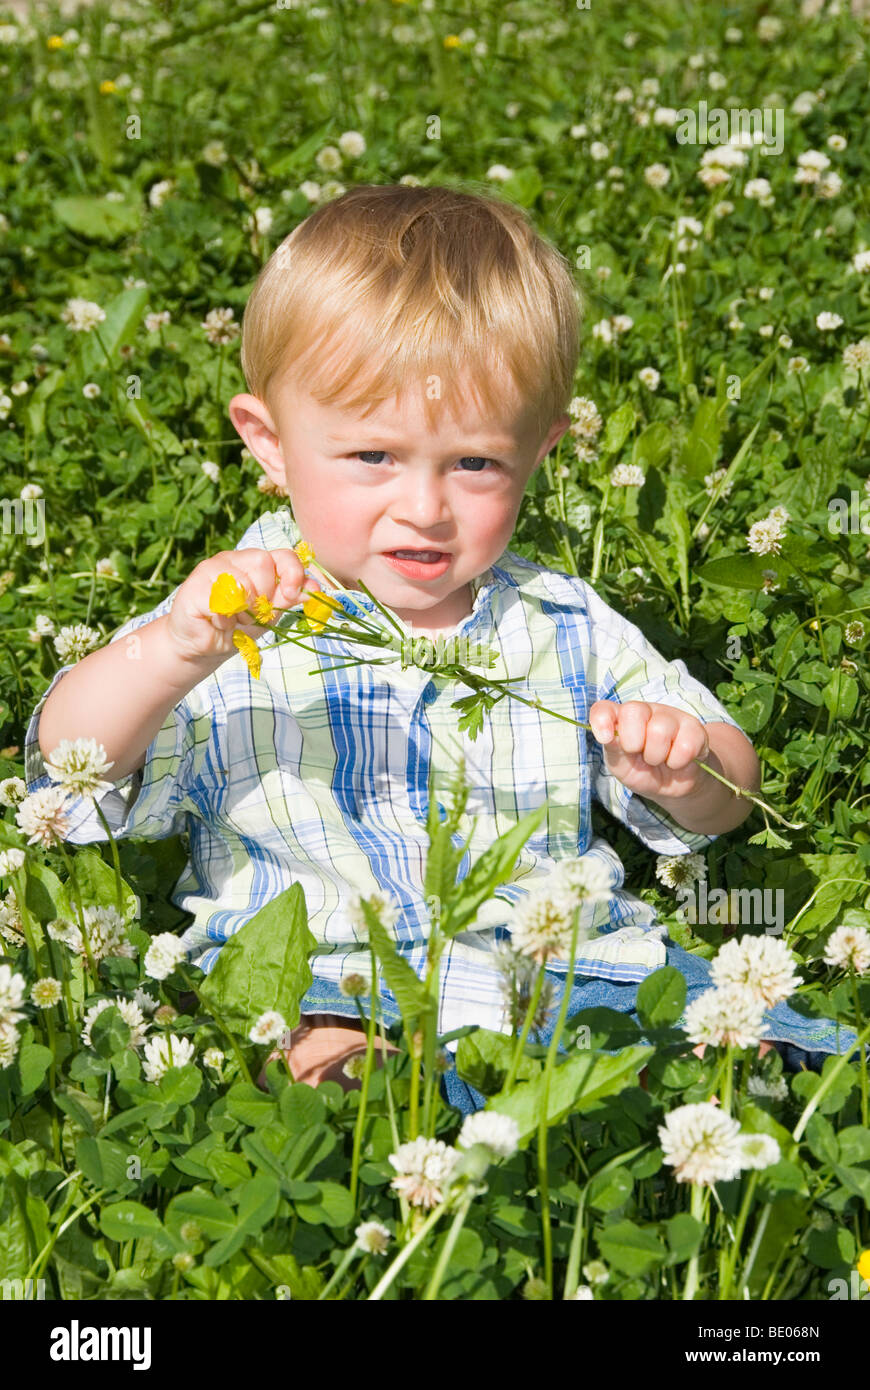 Little Boy Aged 14 Months Sitting in Clover Tearing Heads off Buttercup Flowers Stock Photo